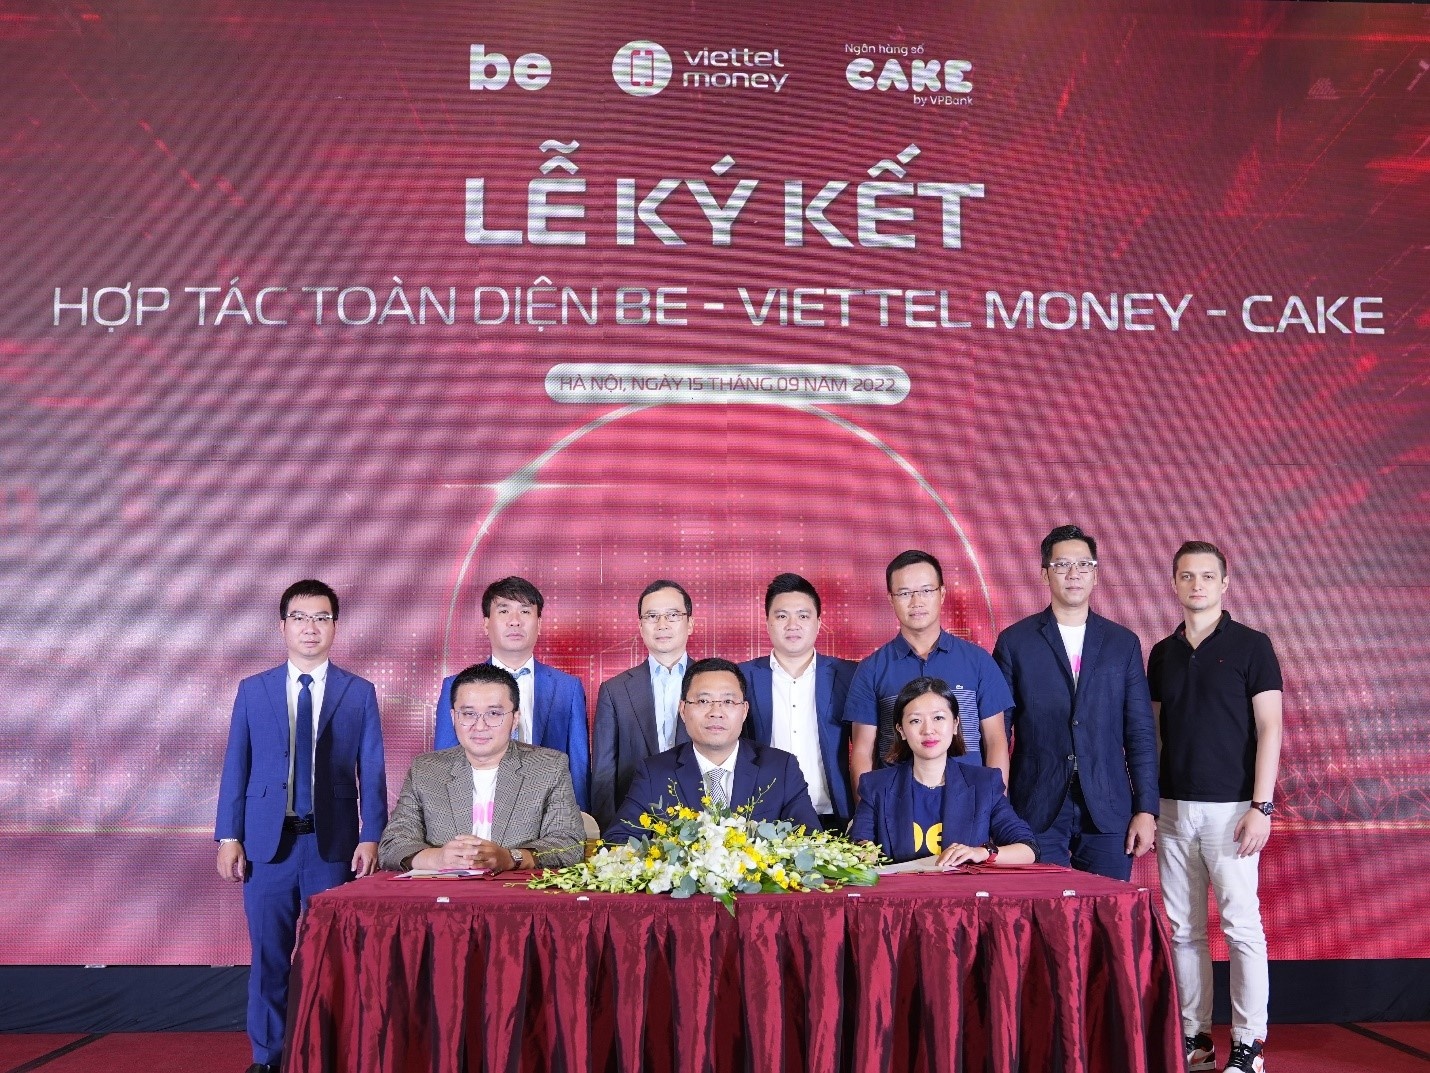 Digital bank Cake and Be sign comprehensive cooperation with Viettel Money